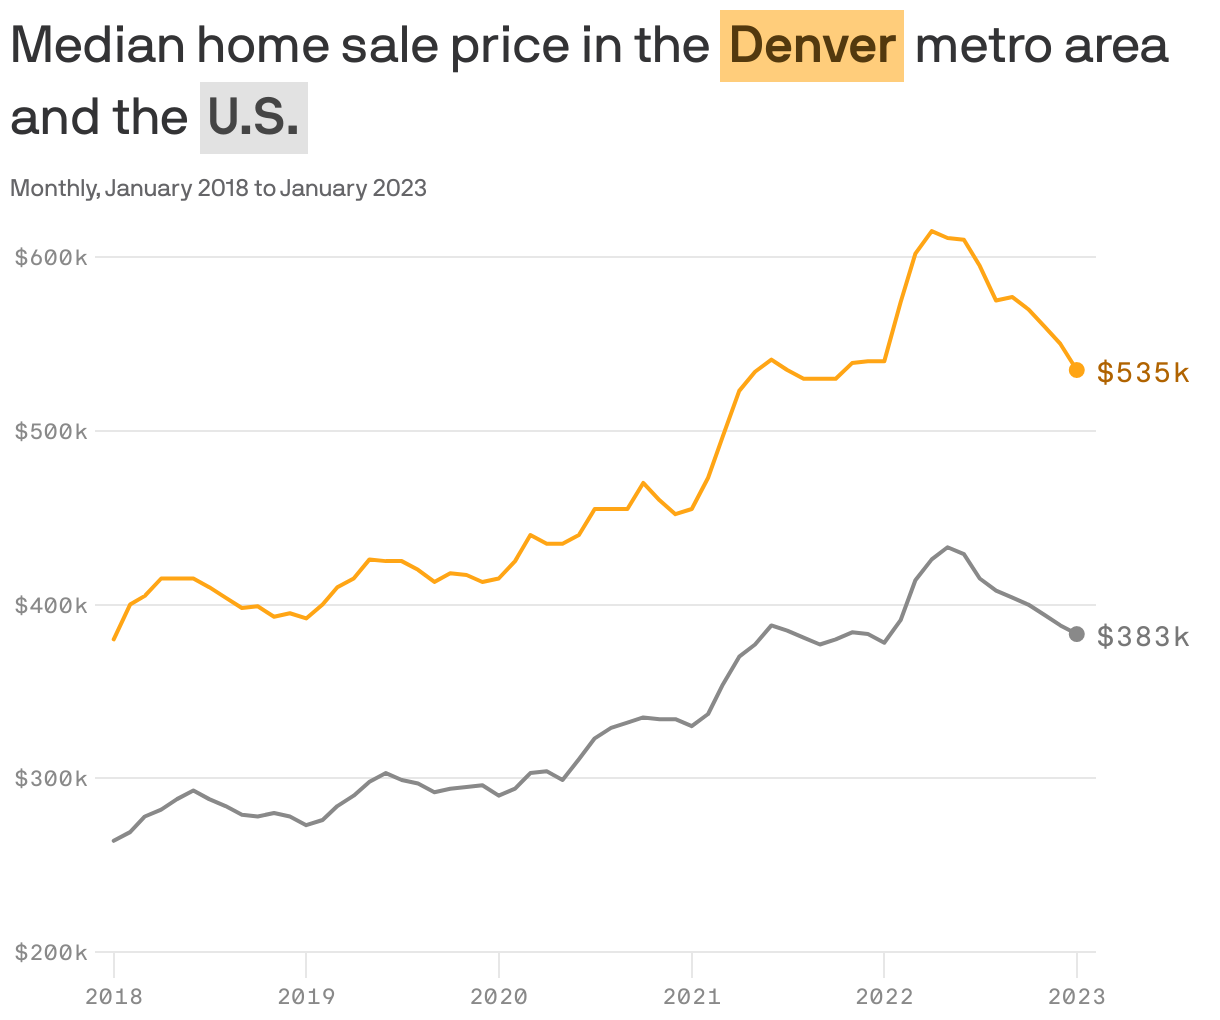 Median home sale price in the <b style='background-color: #FFCD7B; color: #53390E; display: inline-block; padding: 1px 4px; whitespace: no-wrap;'>Denver</b> metro area and the <b style='background-color: #E2E2E2; color: #454545; display: inline-block; padding: 1px 4px; whitespace: no-wrap;'>U.S.</b>